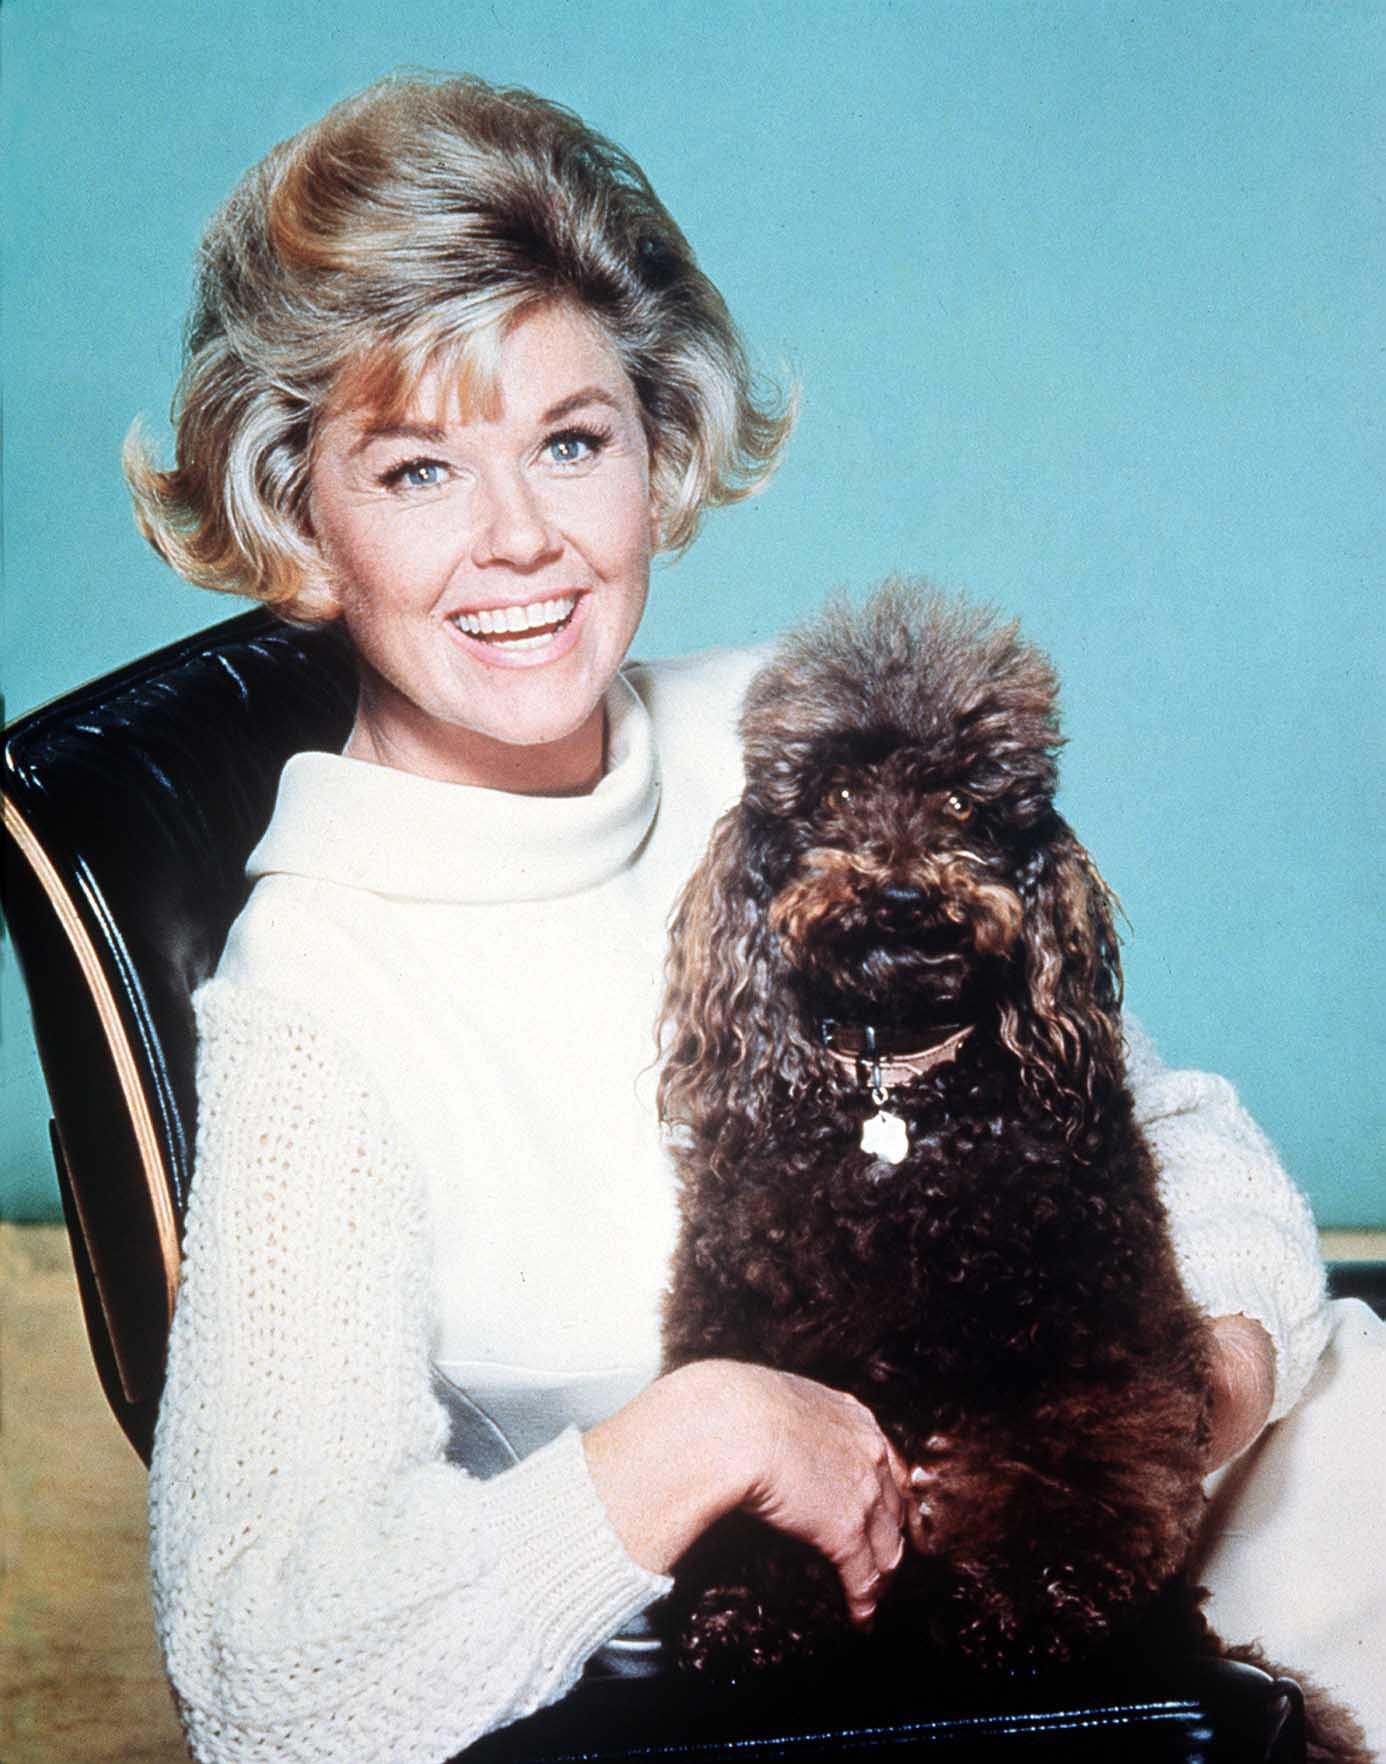 American actress and singer Doris Day with a dog in 1968 | Photo: Getty Images